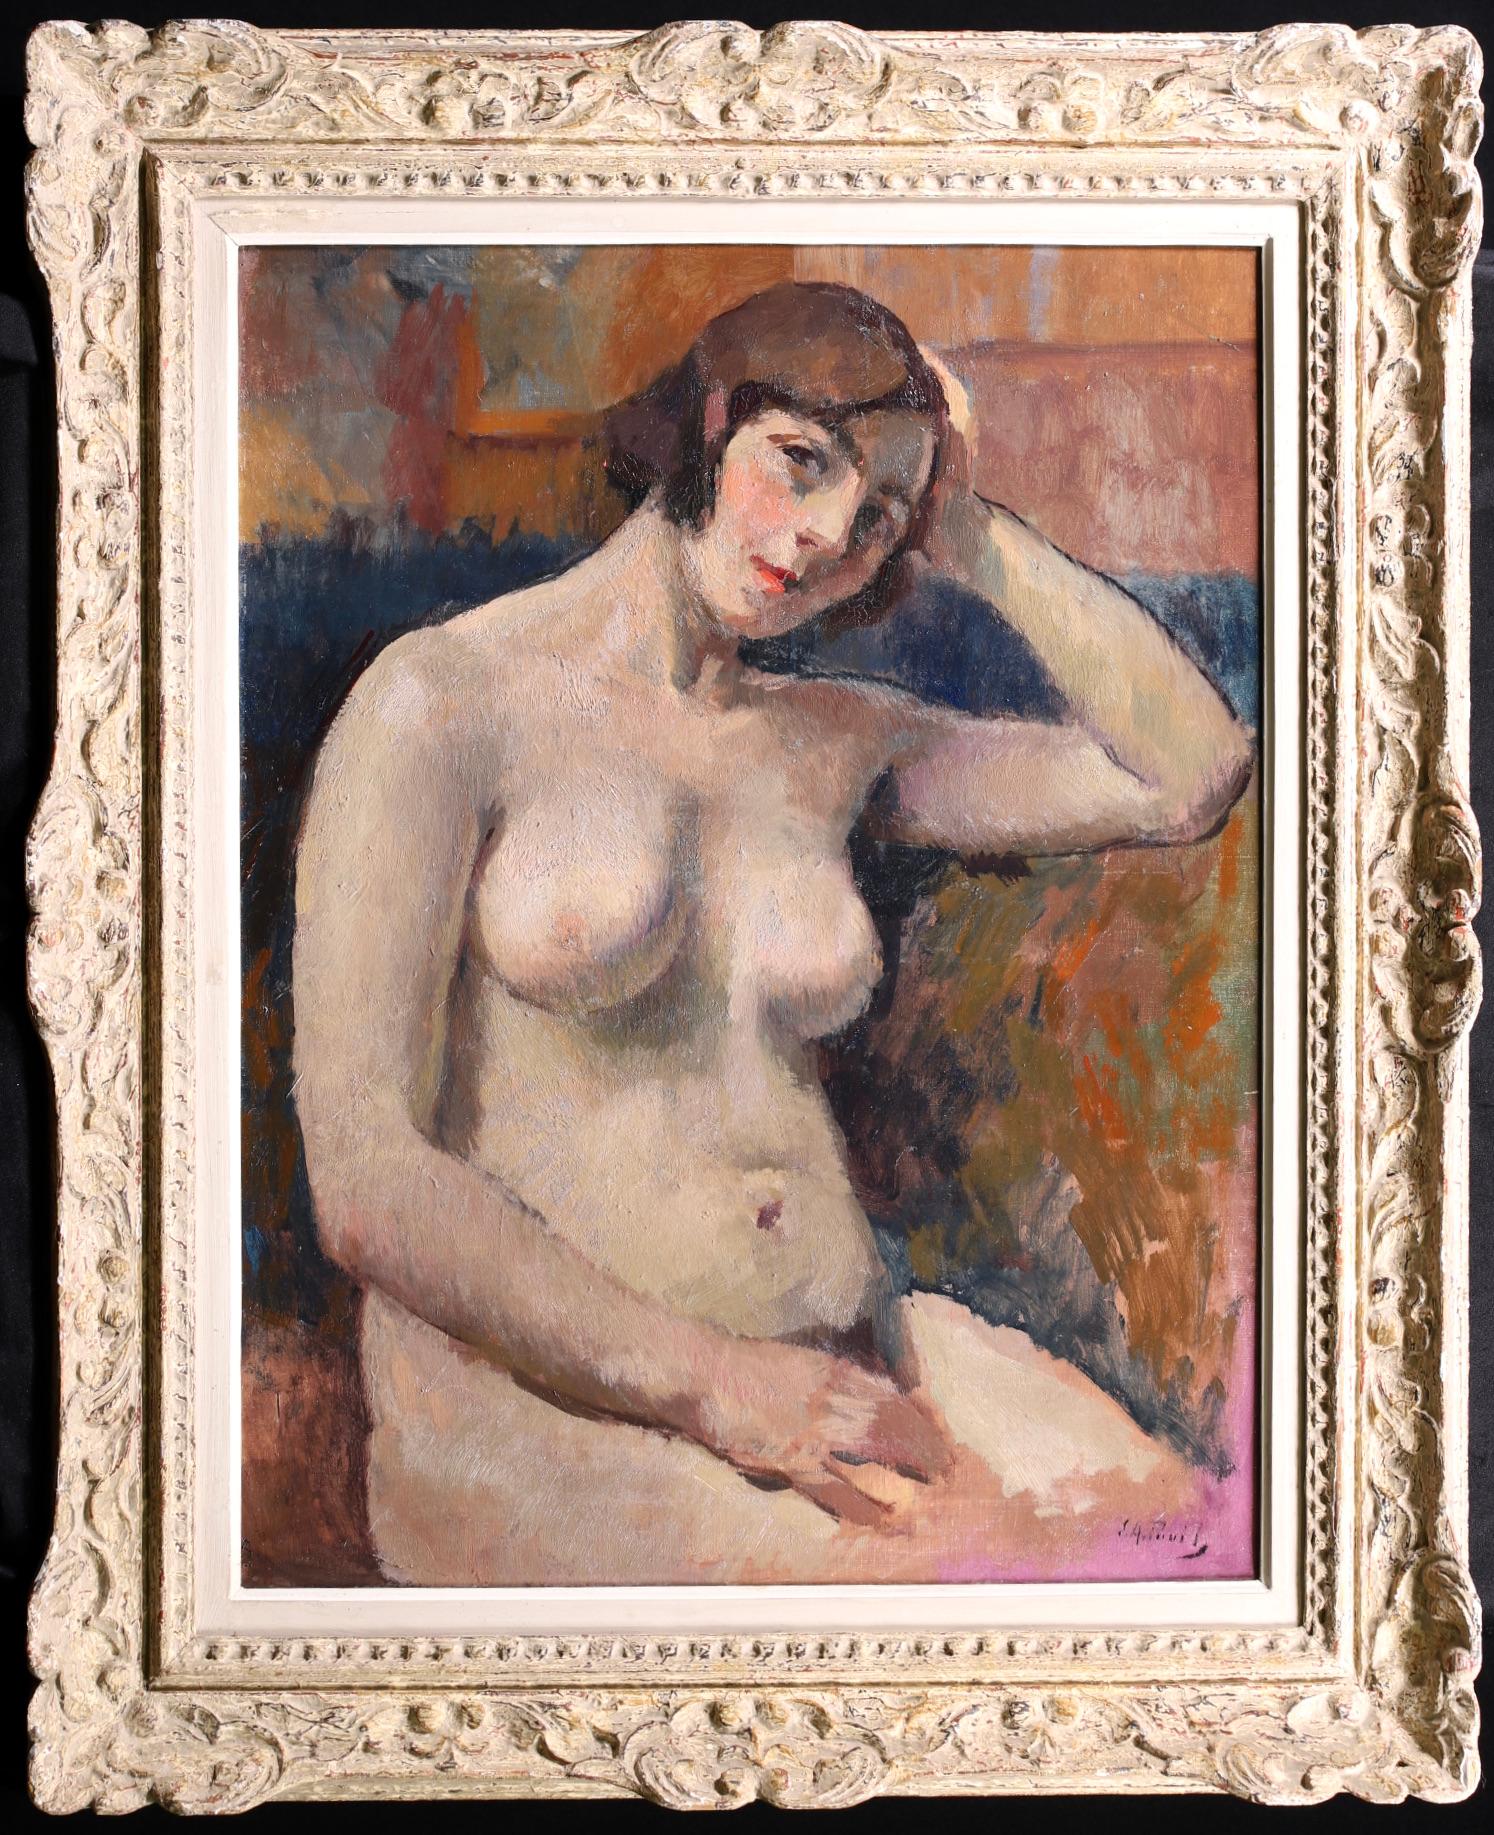 Portrait of a Female Nude - Post Impressionist Oil by Elie Pavil